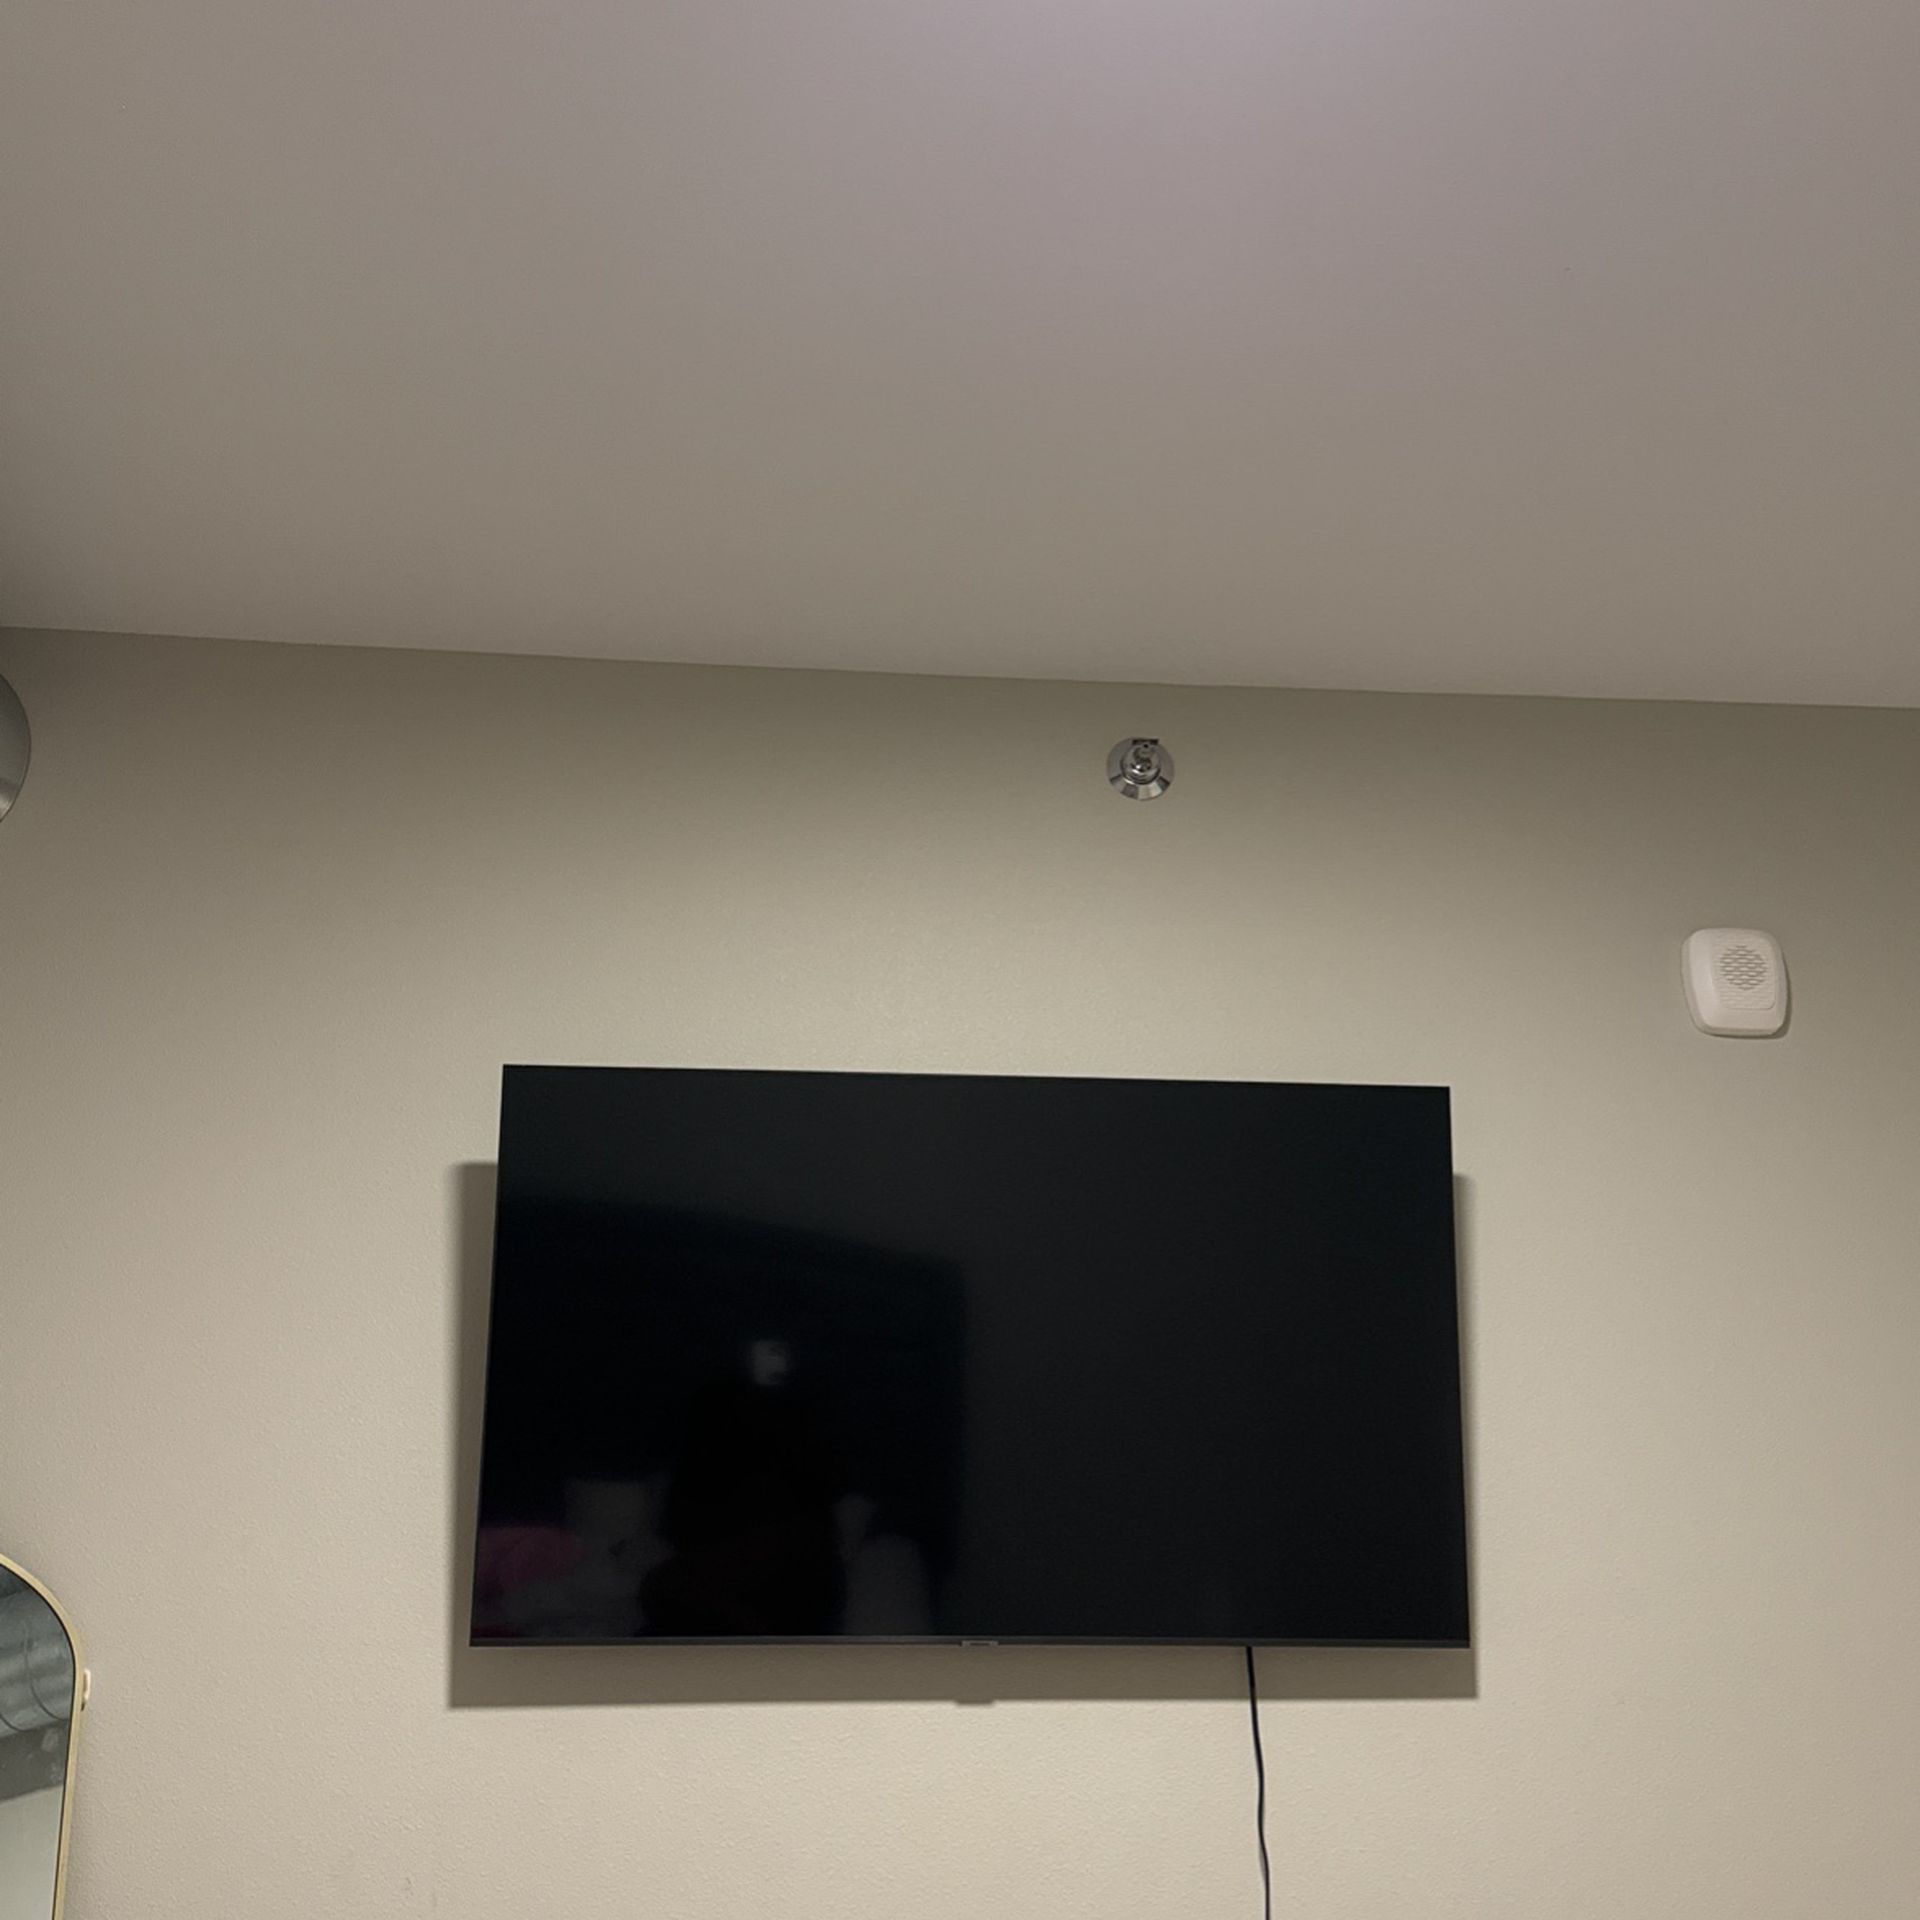 55” Samsung Smart Tv With Wall Mount 